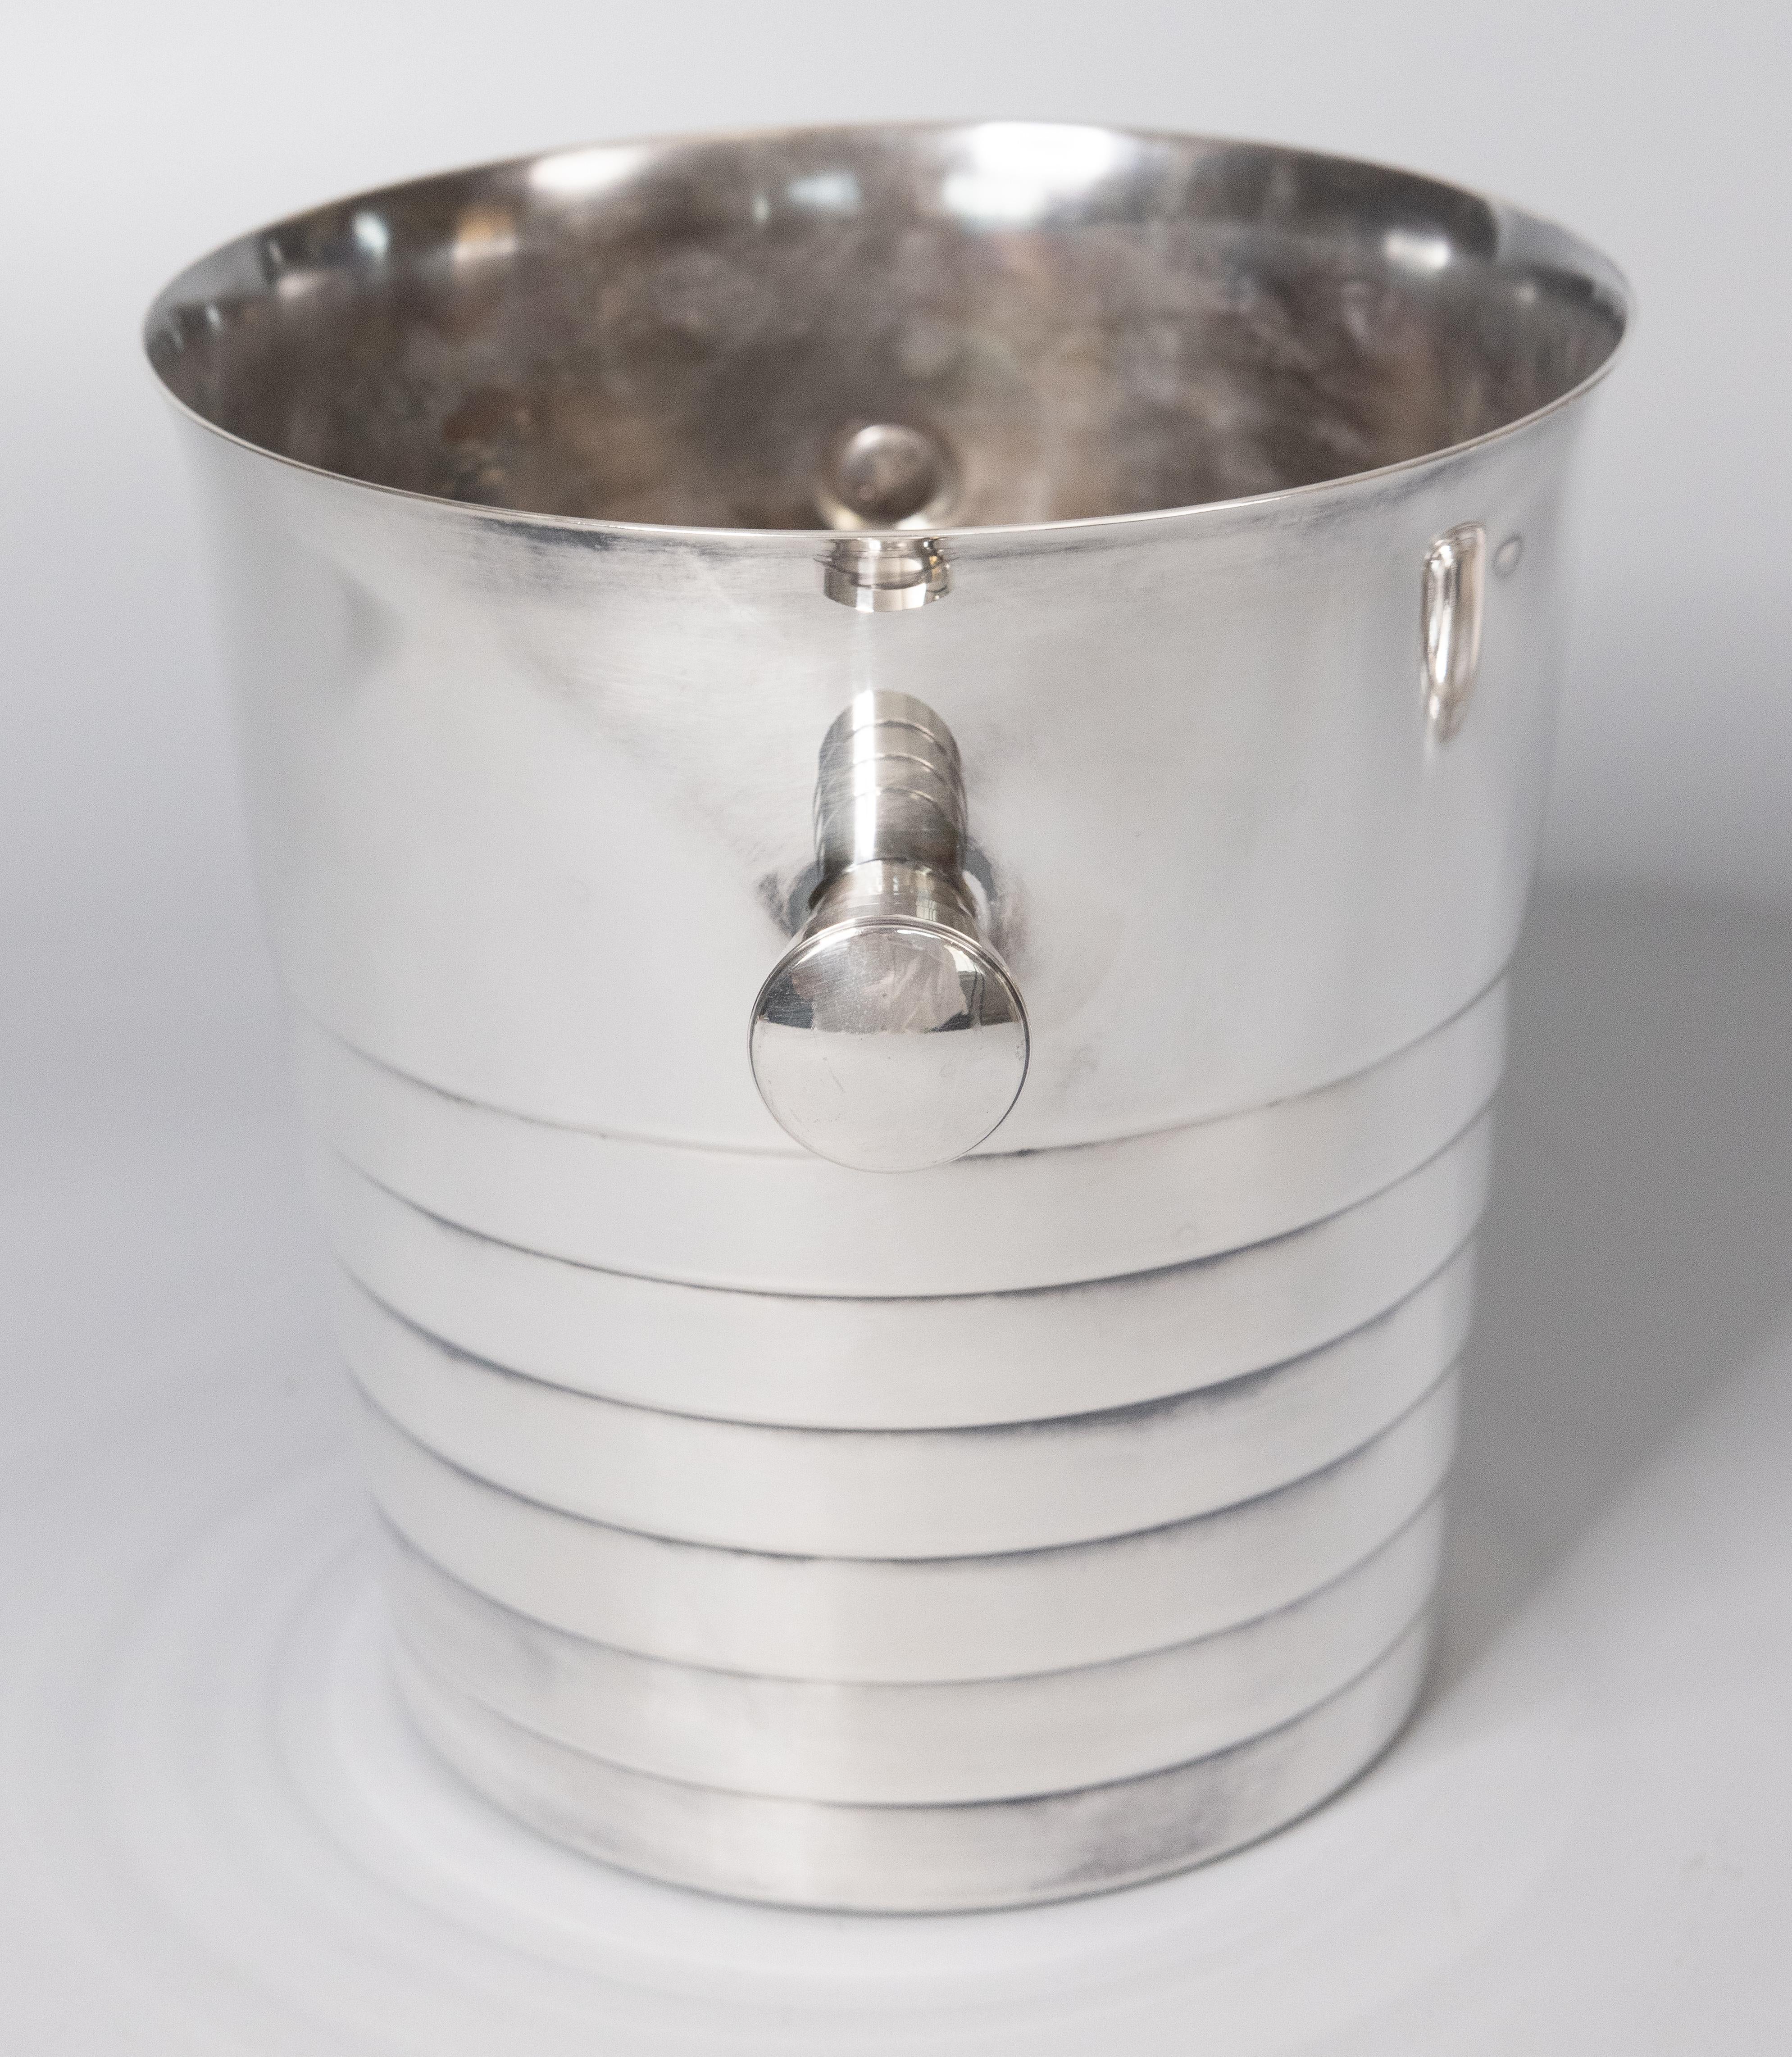 A superb vintage Art Deco style Christofle silverplate champagne ice bucket / wine cooler made in France. Hallmarked on reverse. This stylish ice bucket is solid and heavy with a sleek design, perfect for the modern home. Add the finest French